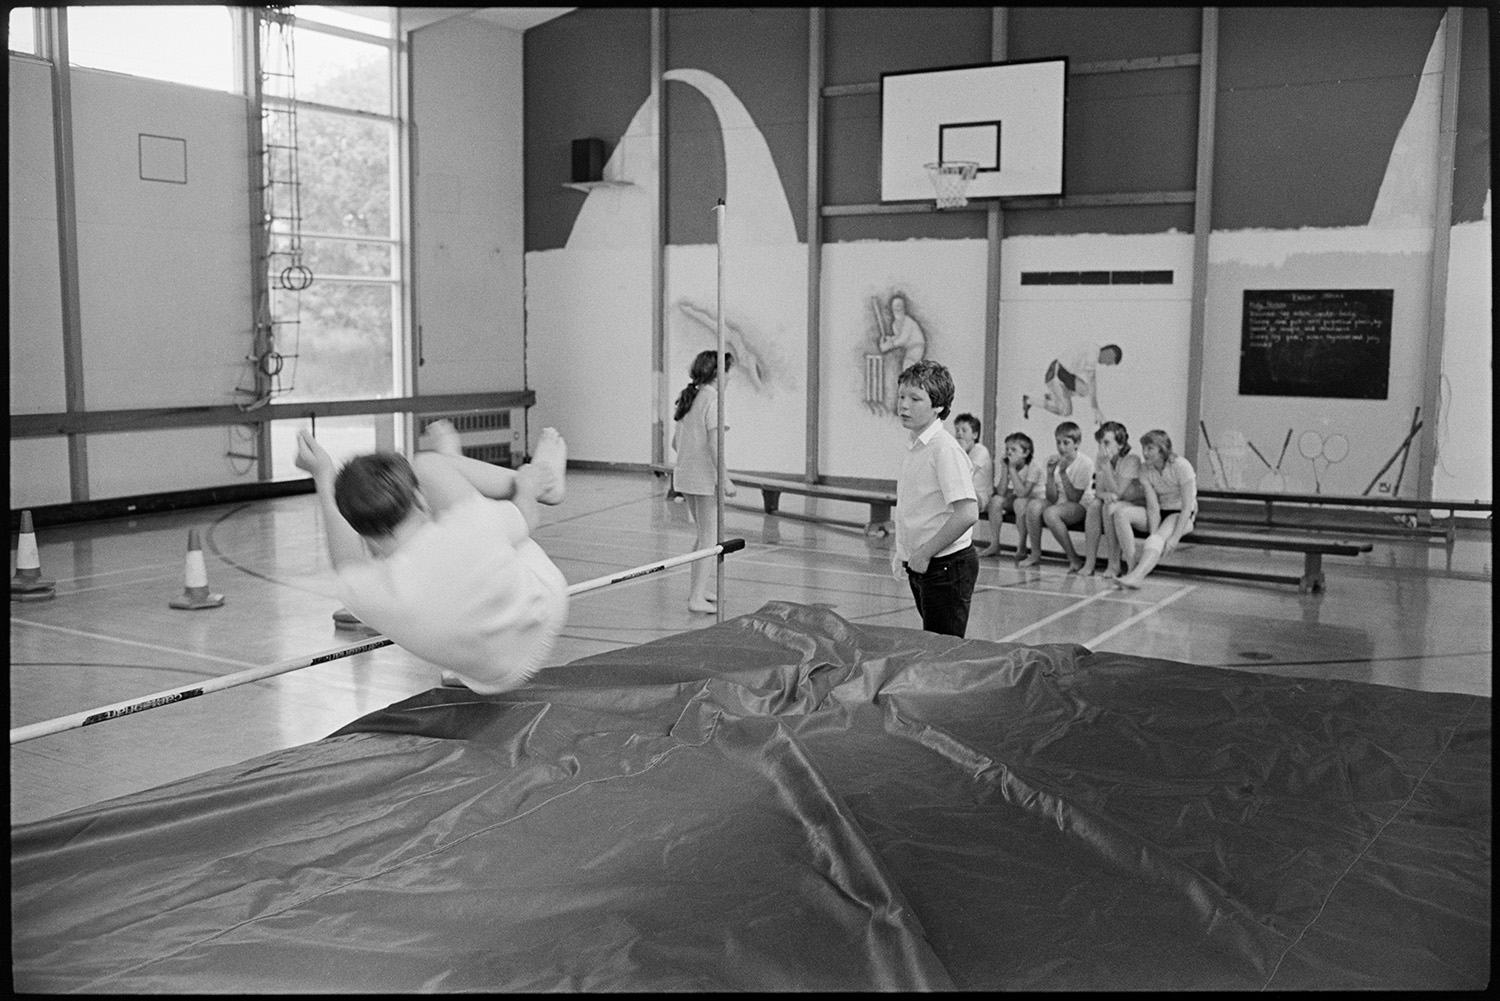 School lessons in classroom gymnastics, technology, craft, woodwork workshop.
[A gymnastics class at Chulmleigh Community College sports hall. A boy is completing the high jump, with another boy watching. There are pupils sitting on a bench in the background, and a rope ladder hanging from the ceiling.]